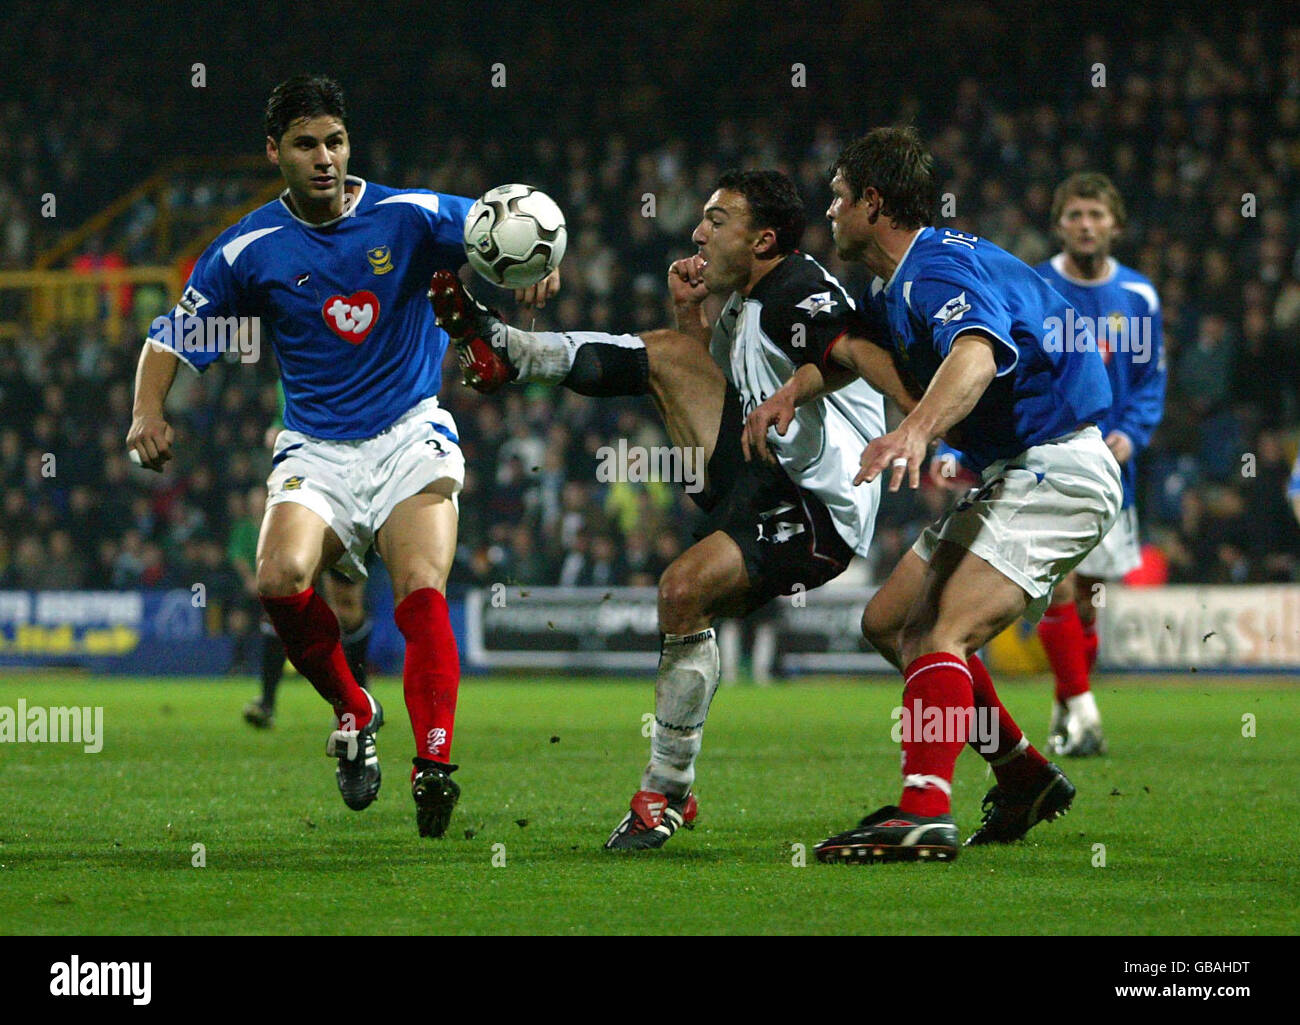 Soccer - FA Barclaycard Premiership - Fulham v Portsmouth. Fulham's Steed Malbranque (c) gets in between Portsmouth's Dejan Stefanovic (l) and Arjan De Zeeuw (r) Stock Photo